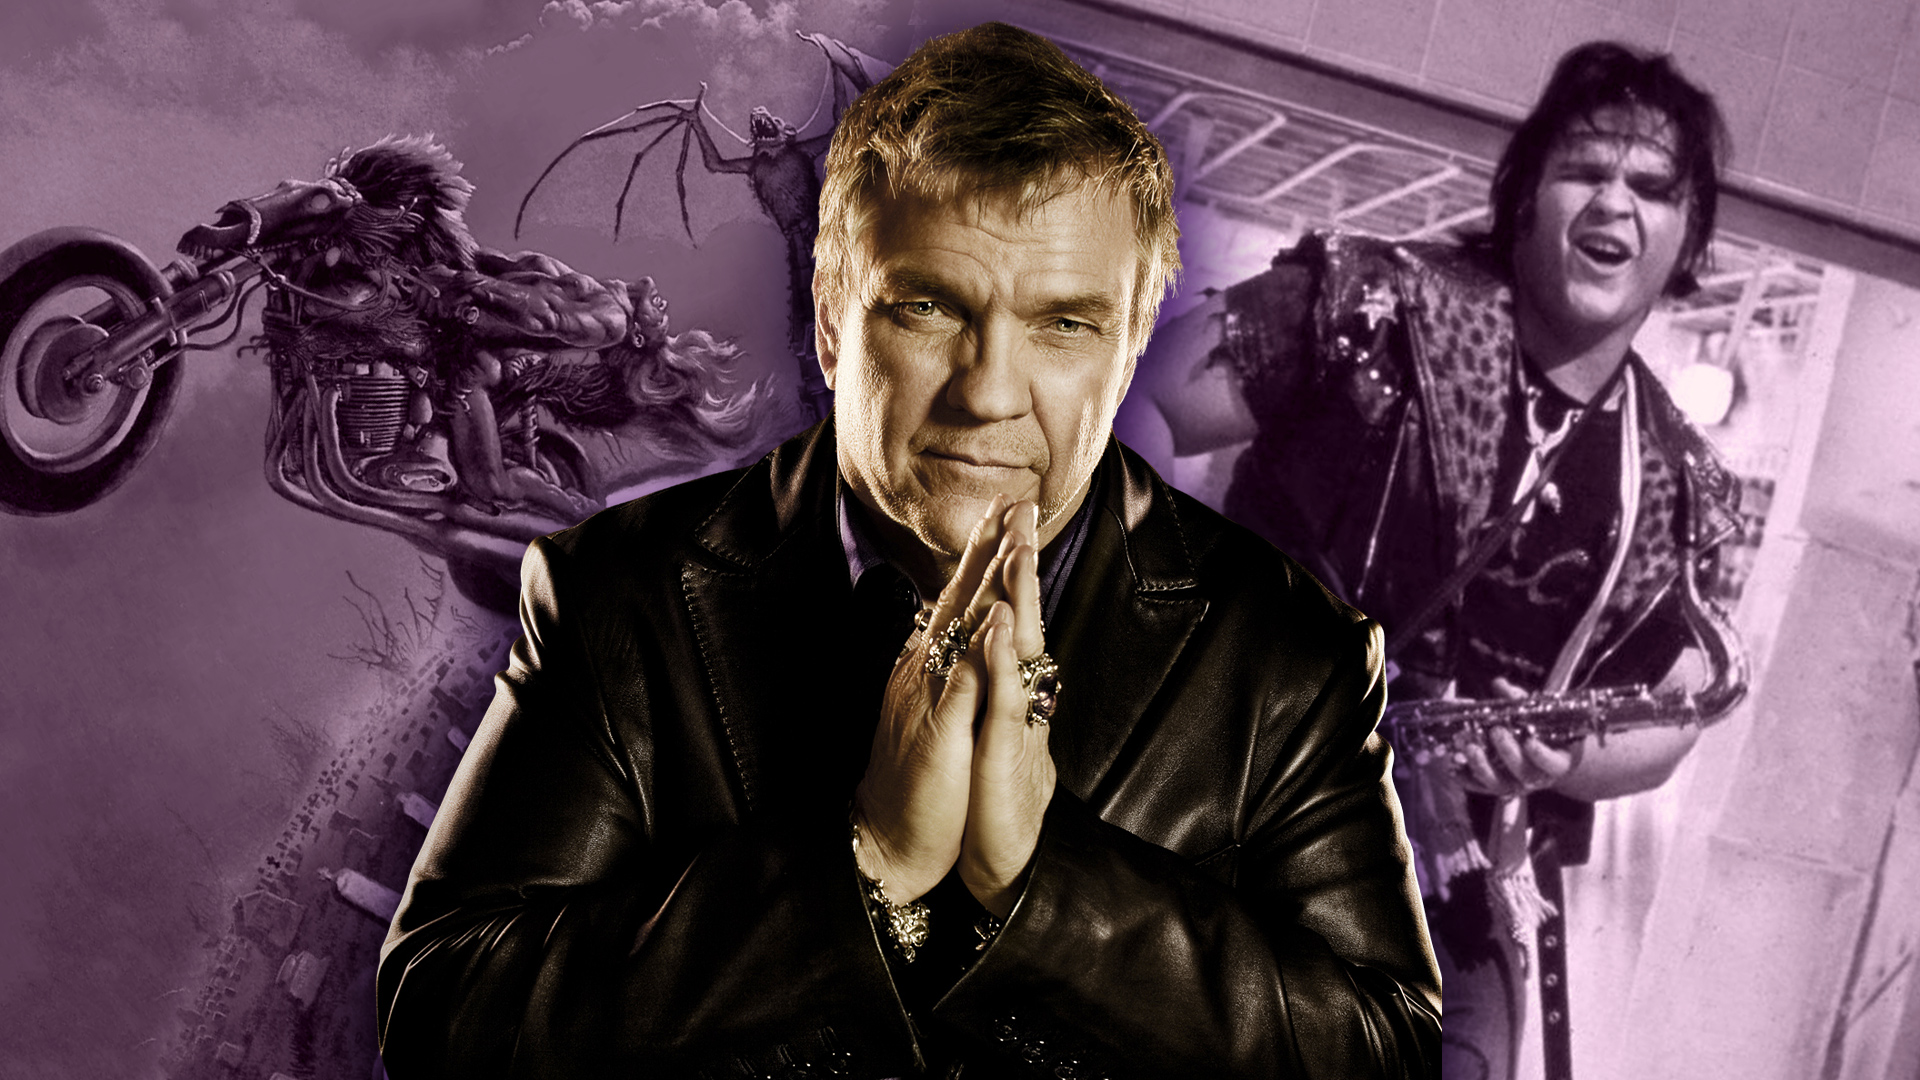 Meat Loaf (Bat Out of Hell Singer and Rocky Horror Star) Tribute